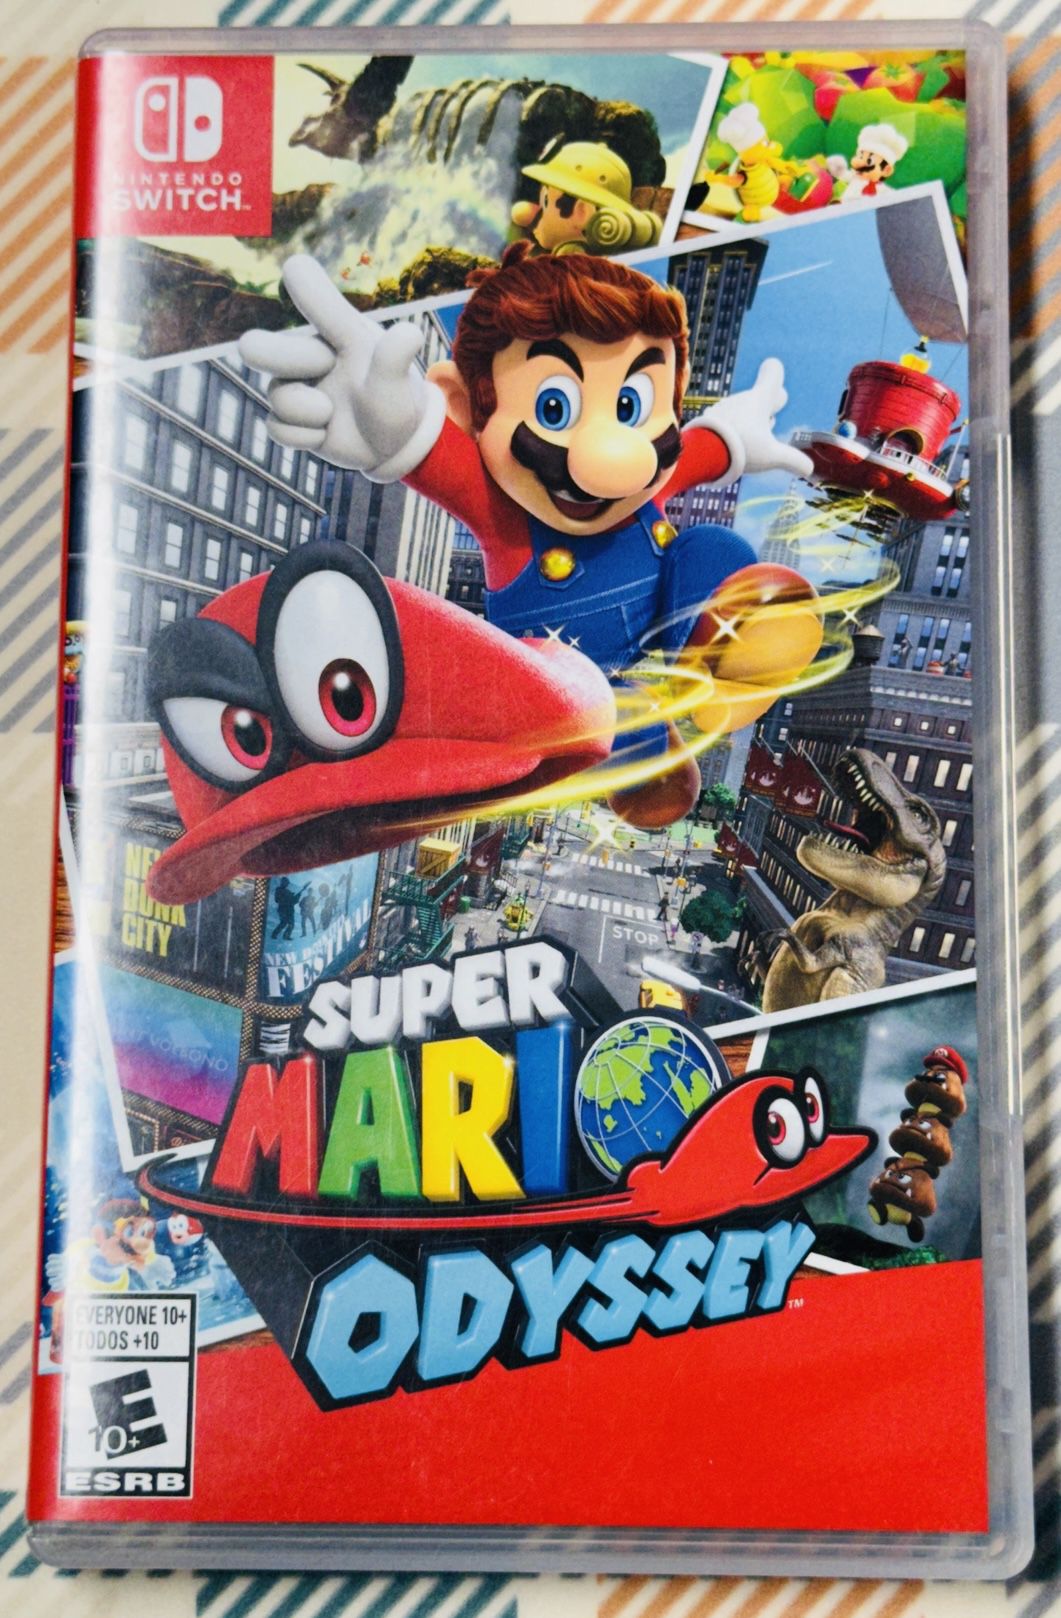 Super Mario Odyssey (Nintendo Switch, 2017) Tested Fast Shipping! Game/Case